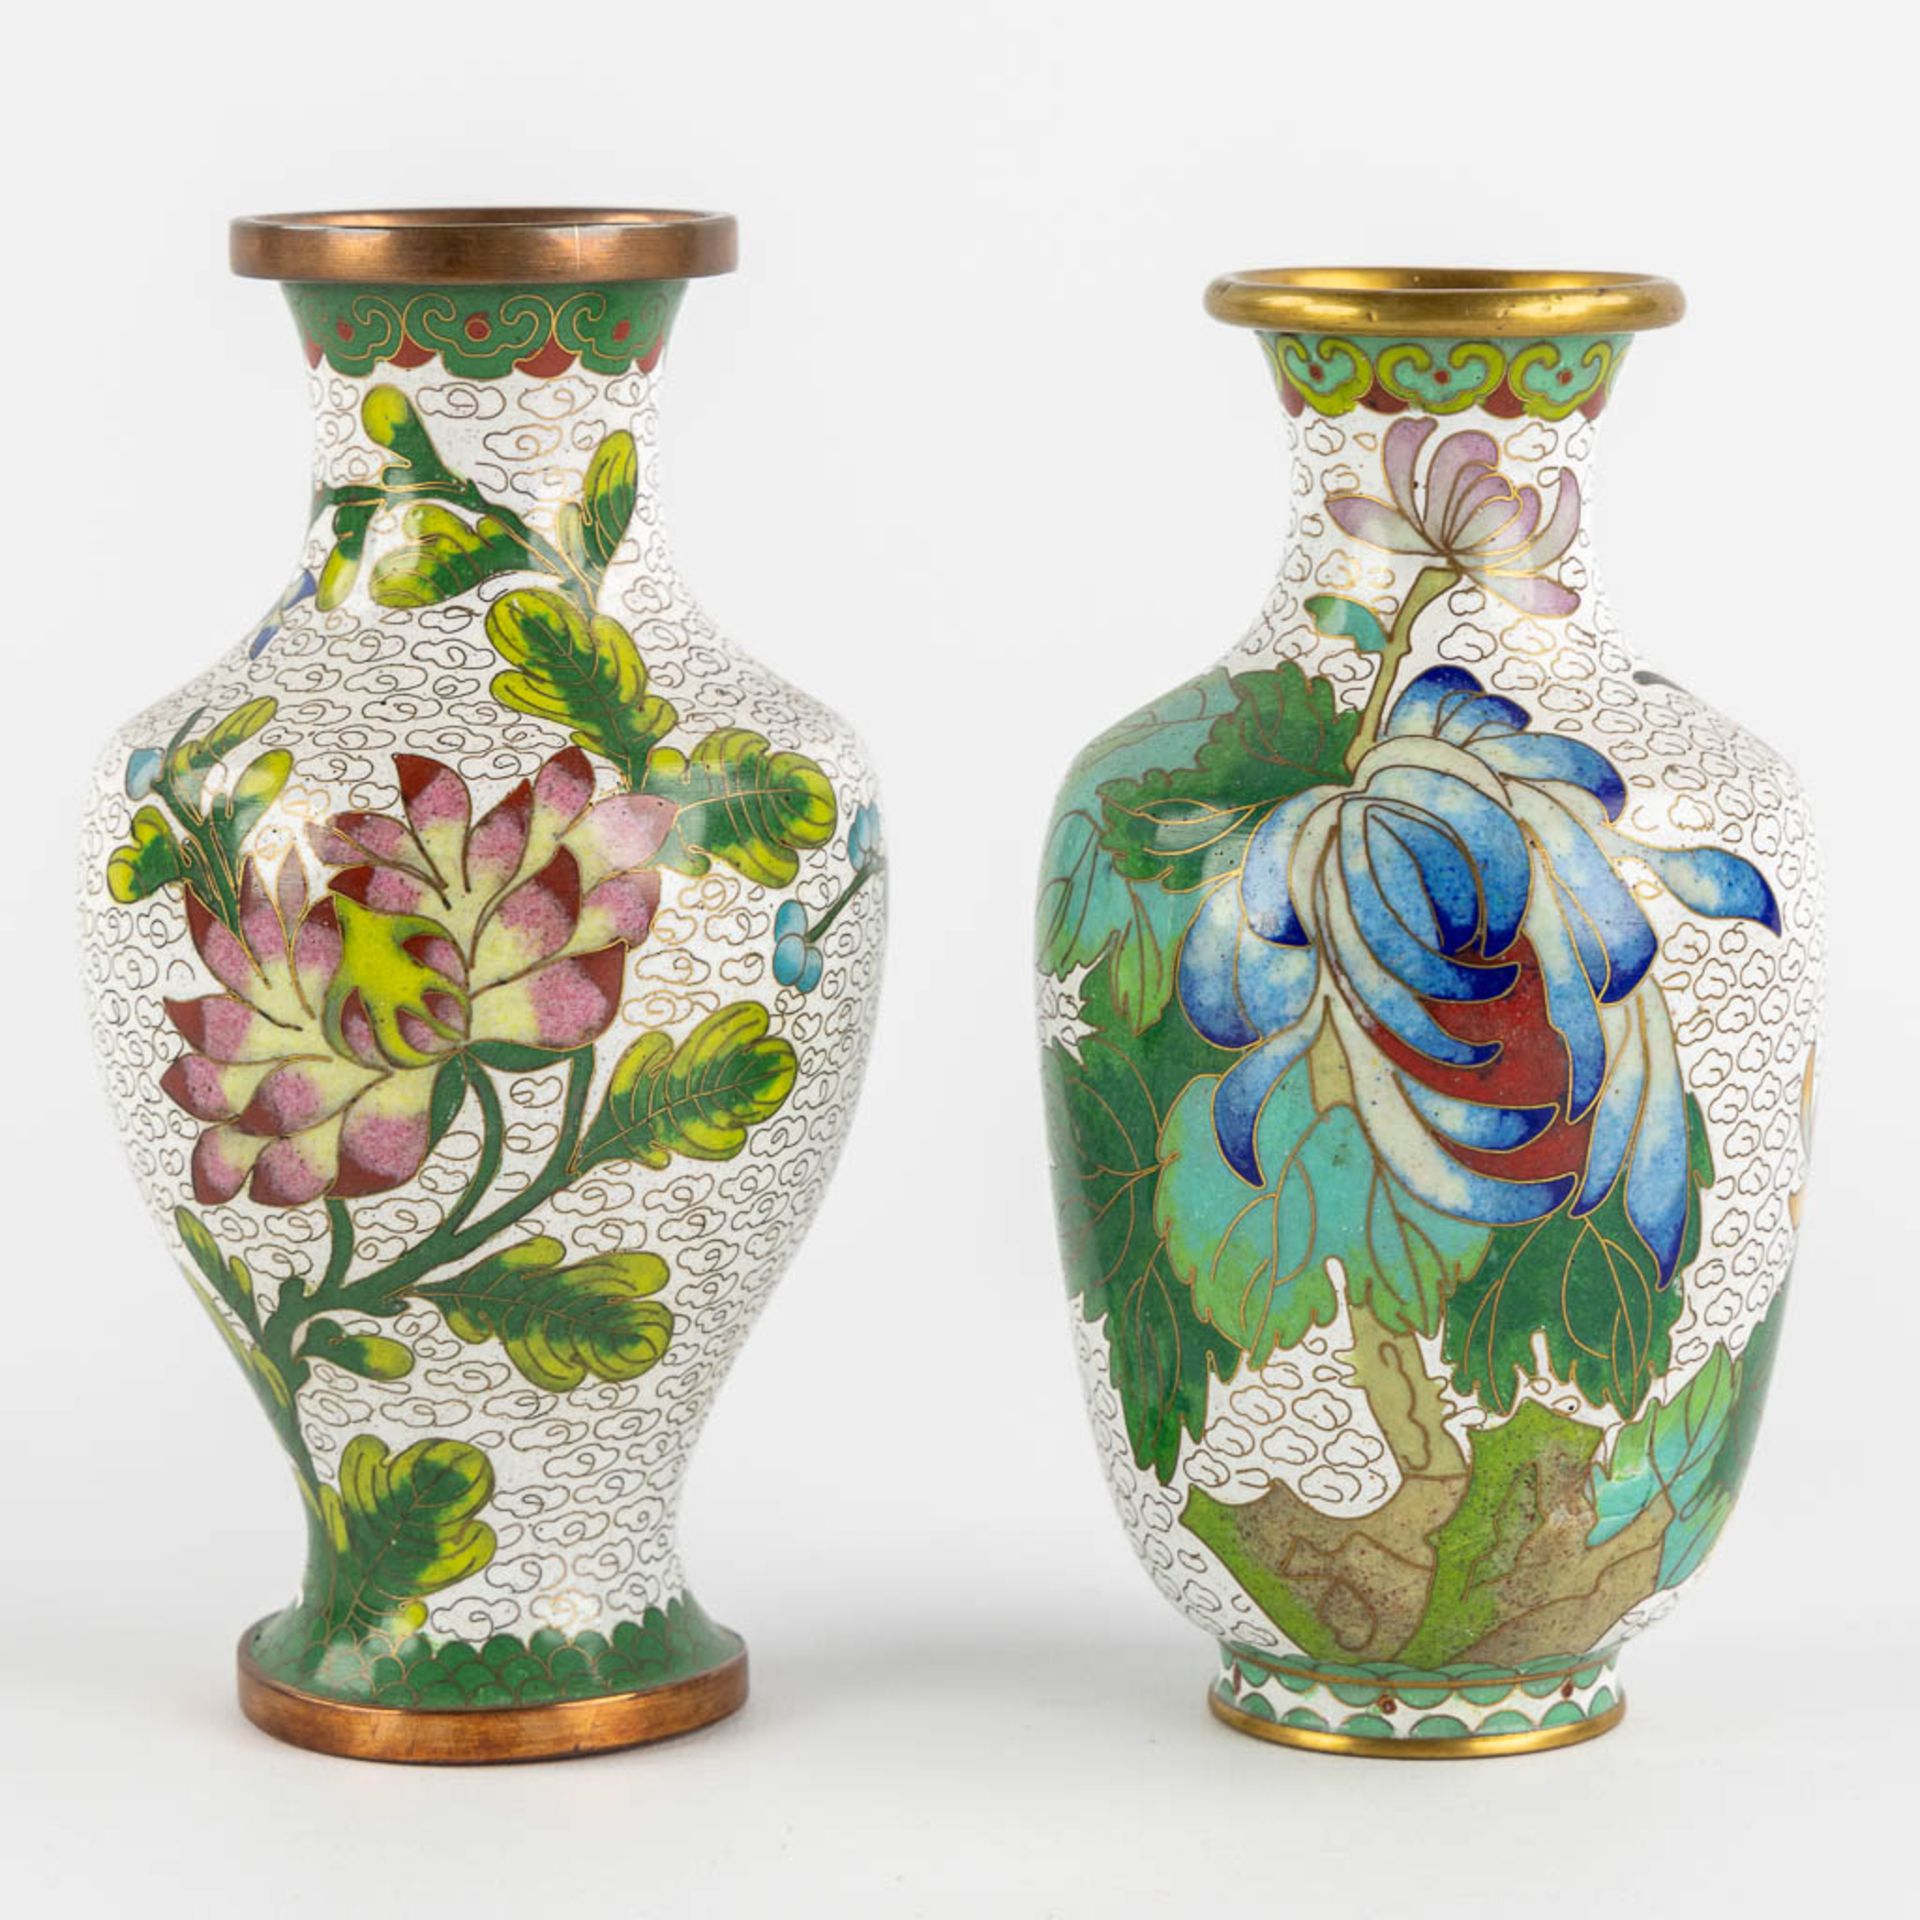 Twelve pieces of Cloisonné enamelled vases and trinklet bowls. Three pairs. (H:23 cm) - Image 9 of 14